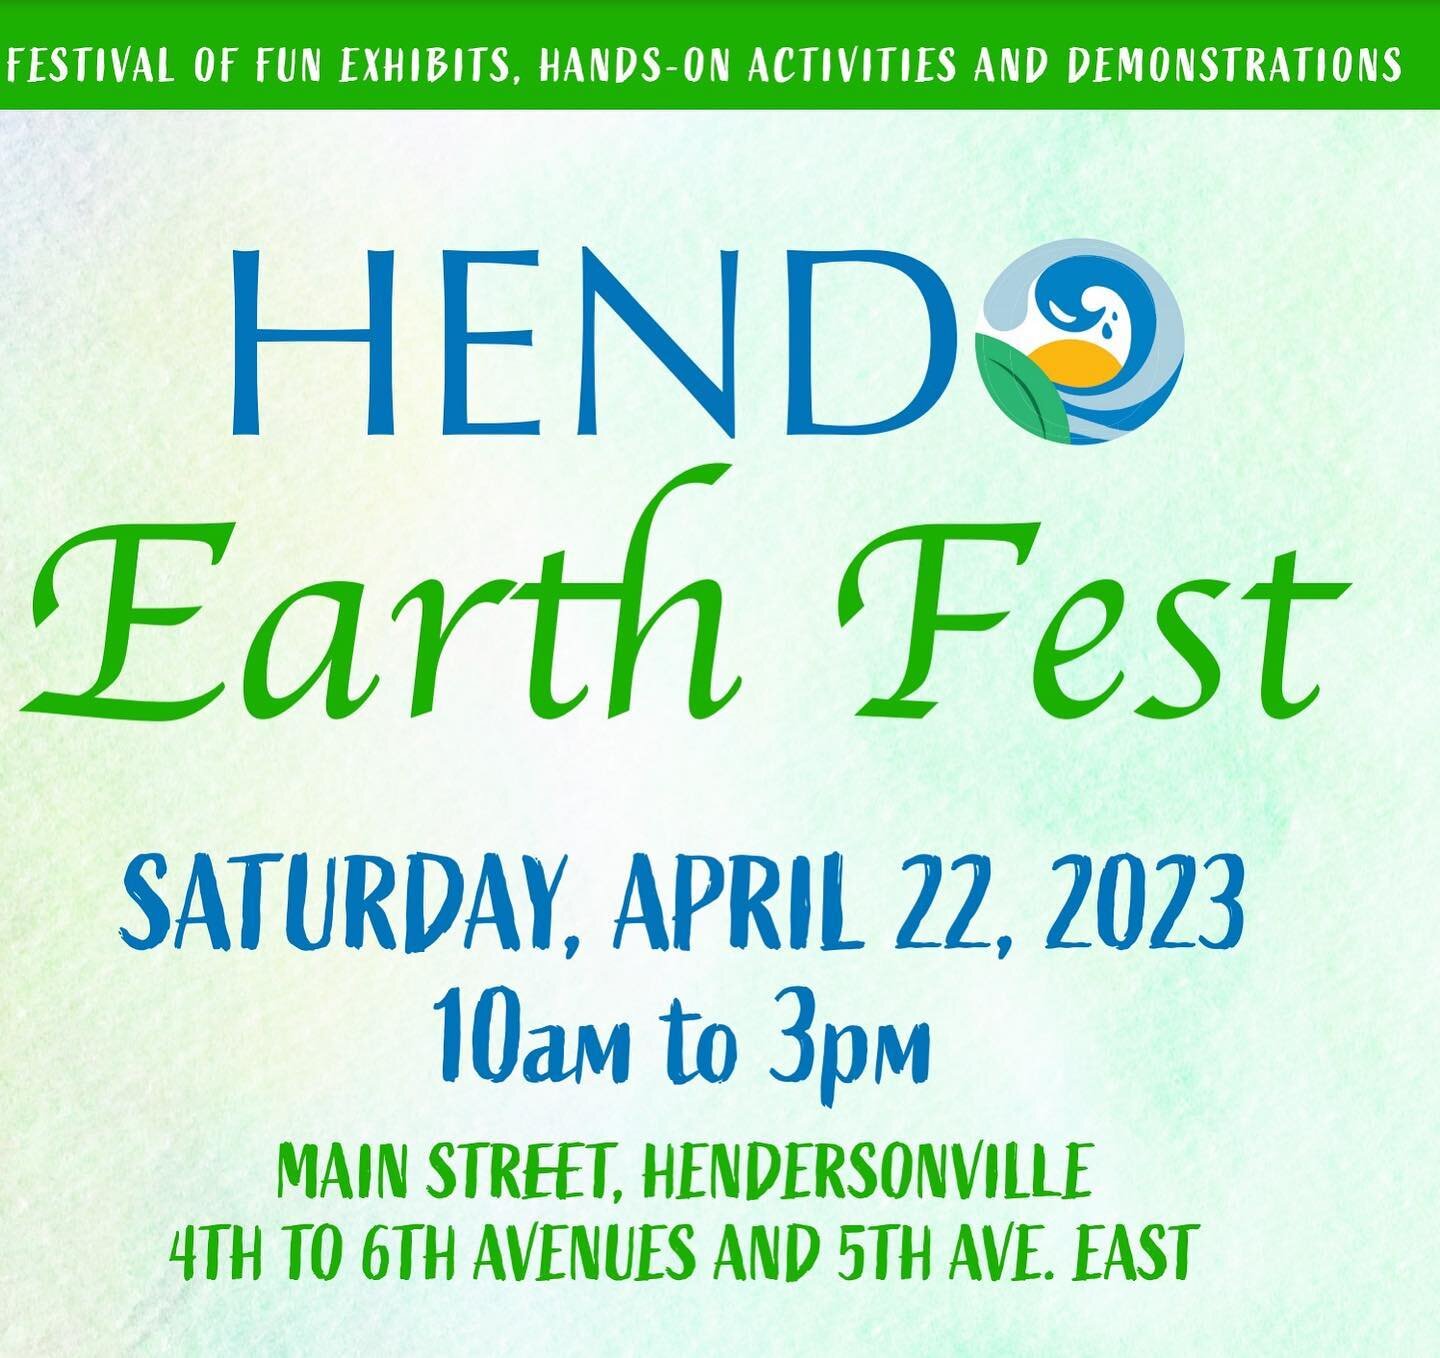 I&rsquo;m excited to be participating in Hendersonville&rsquo;s first annual Earth Fest to celebrate Earth Day tomorrow, Saturday April 22 from 10-3. If you&rsquo;re in the region, come by and visit my booth, as well as everyone else participating. A